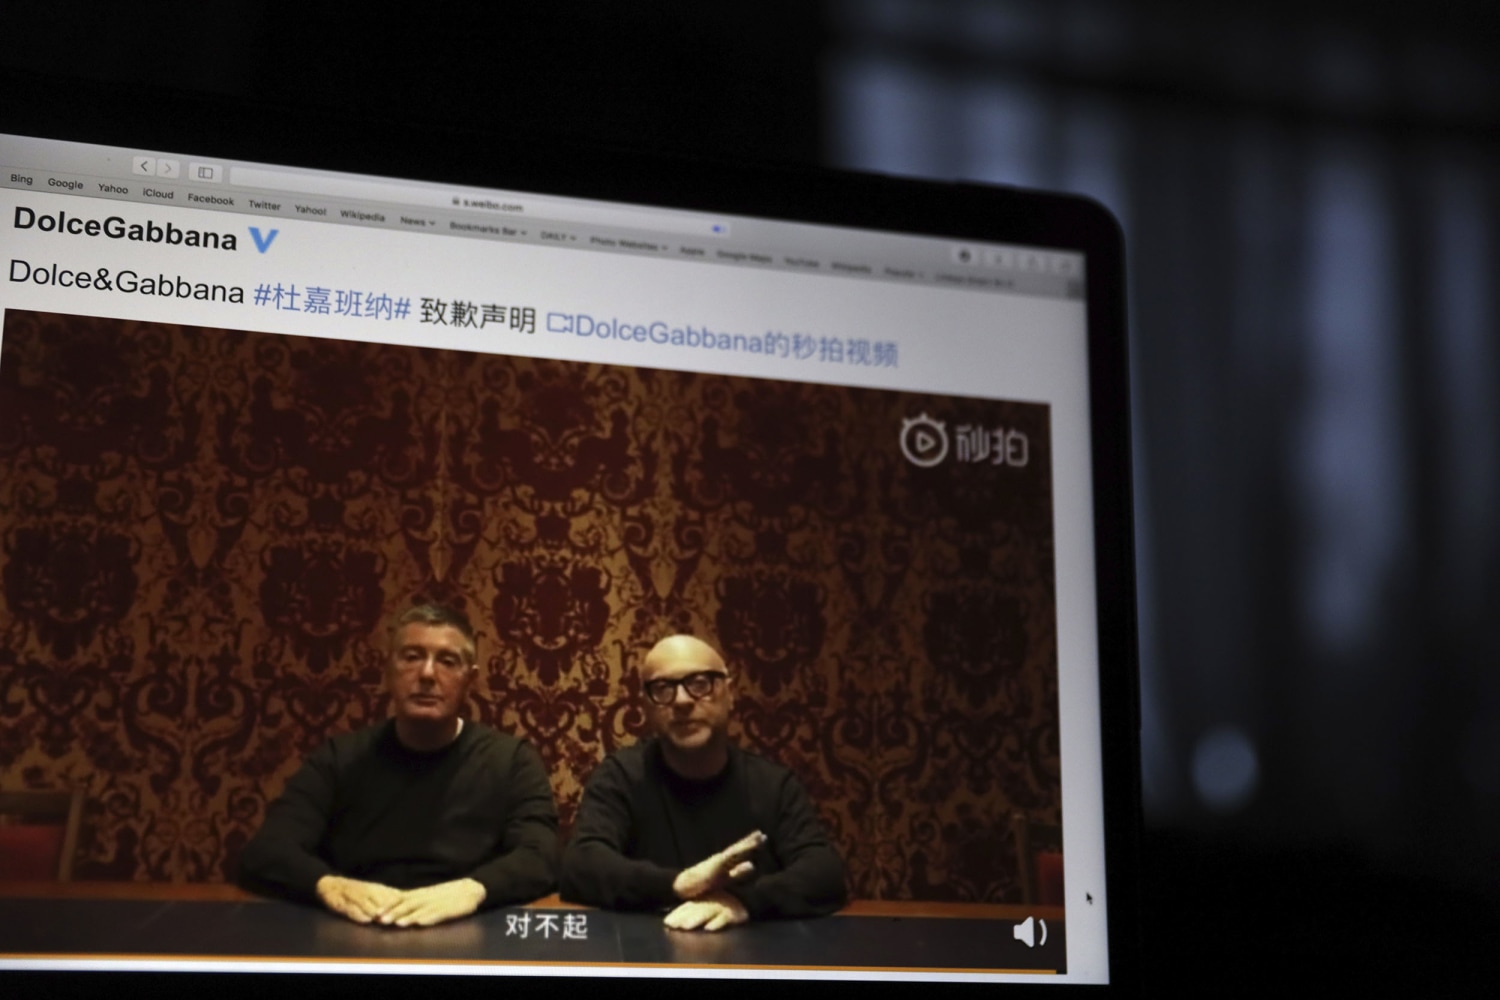 Dolce & Gabbana founders make video apology to China after racism  accusations